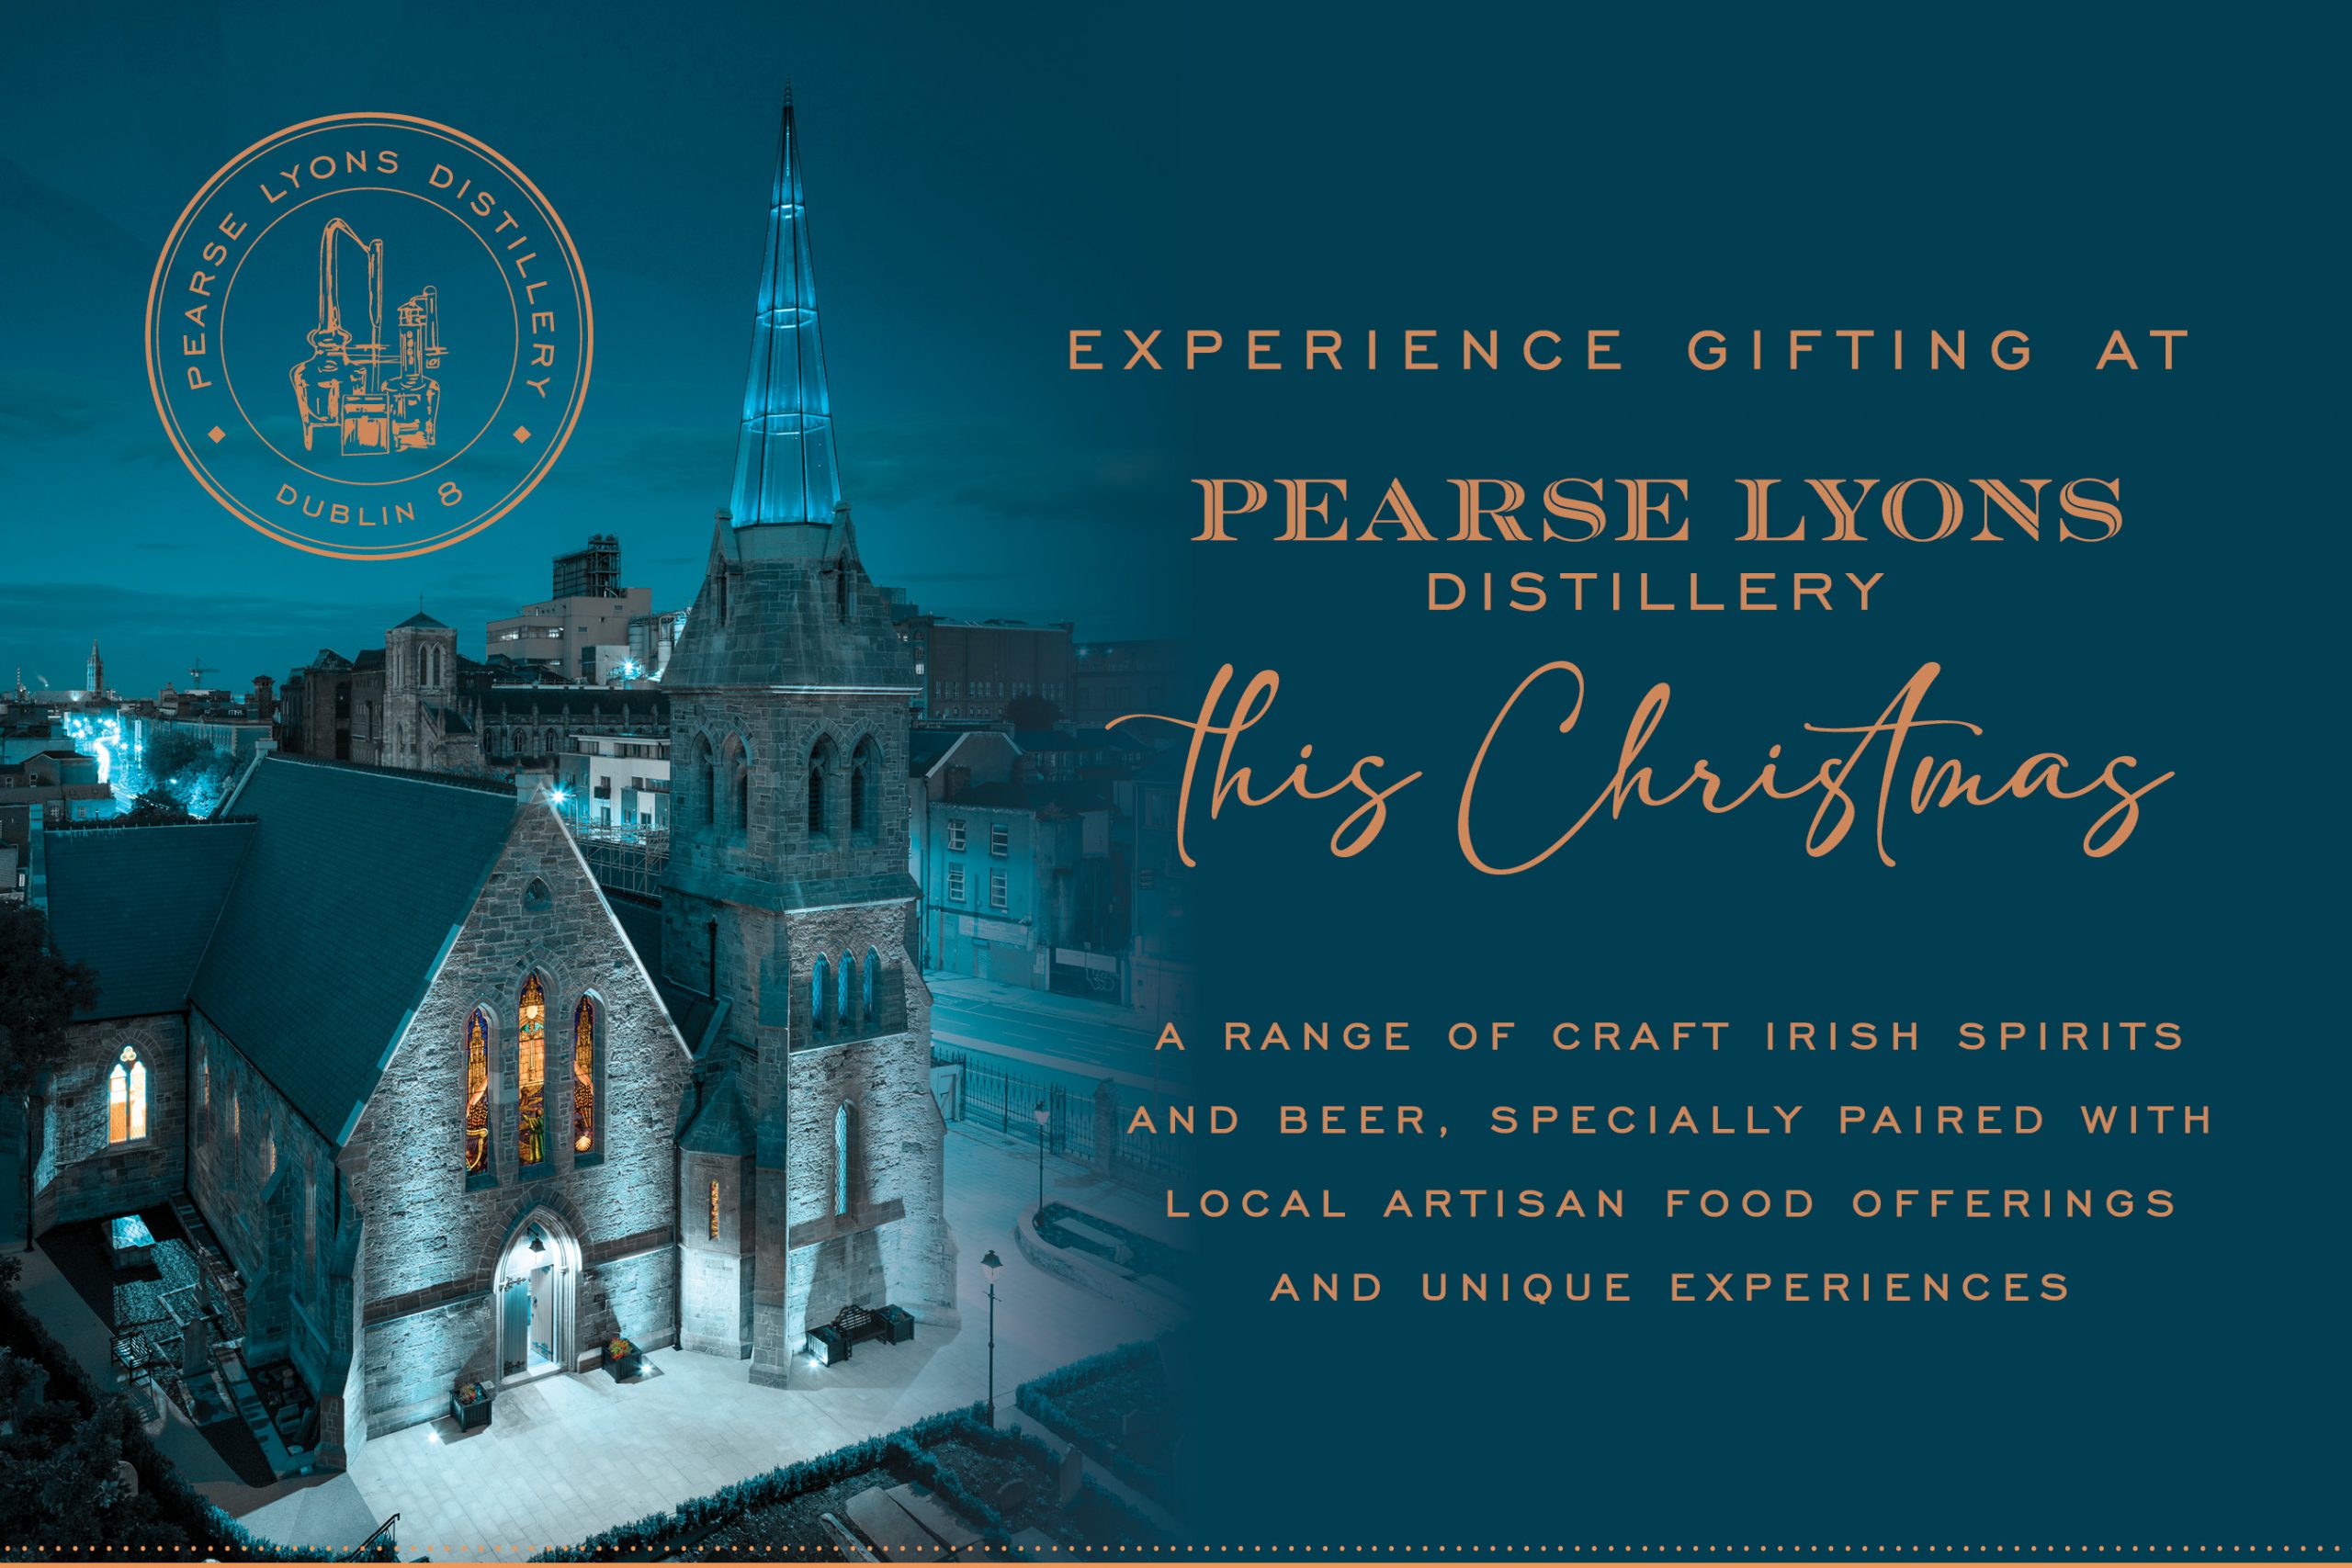 Experience Gifting at Pearse Lyons Distillery this Christmas